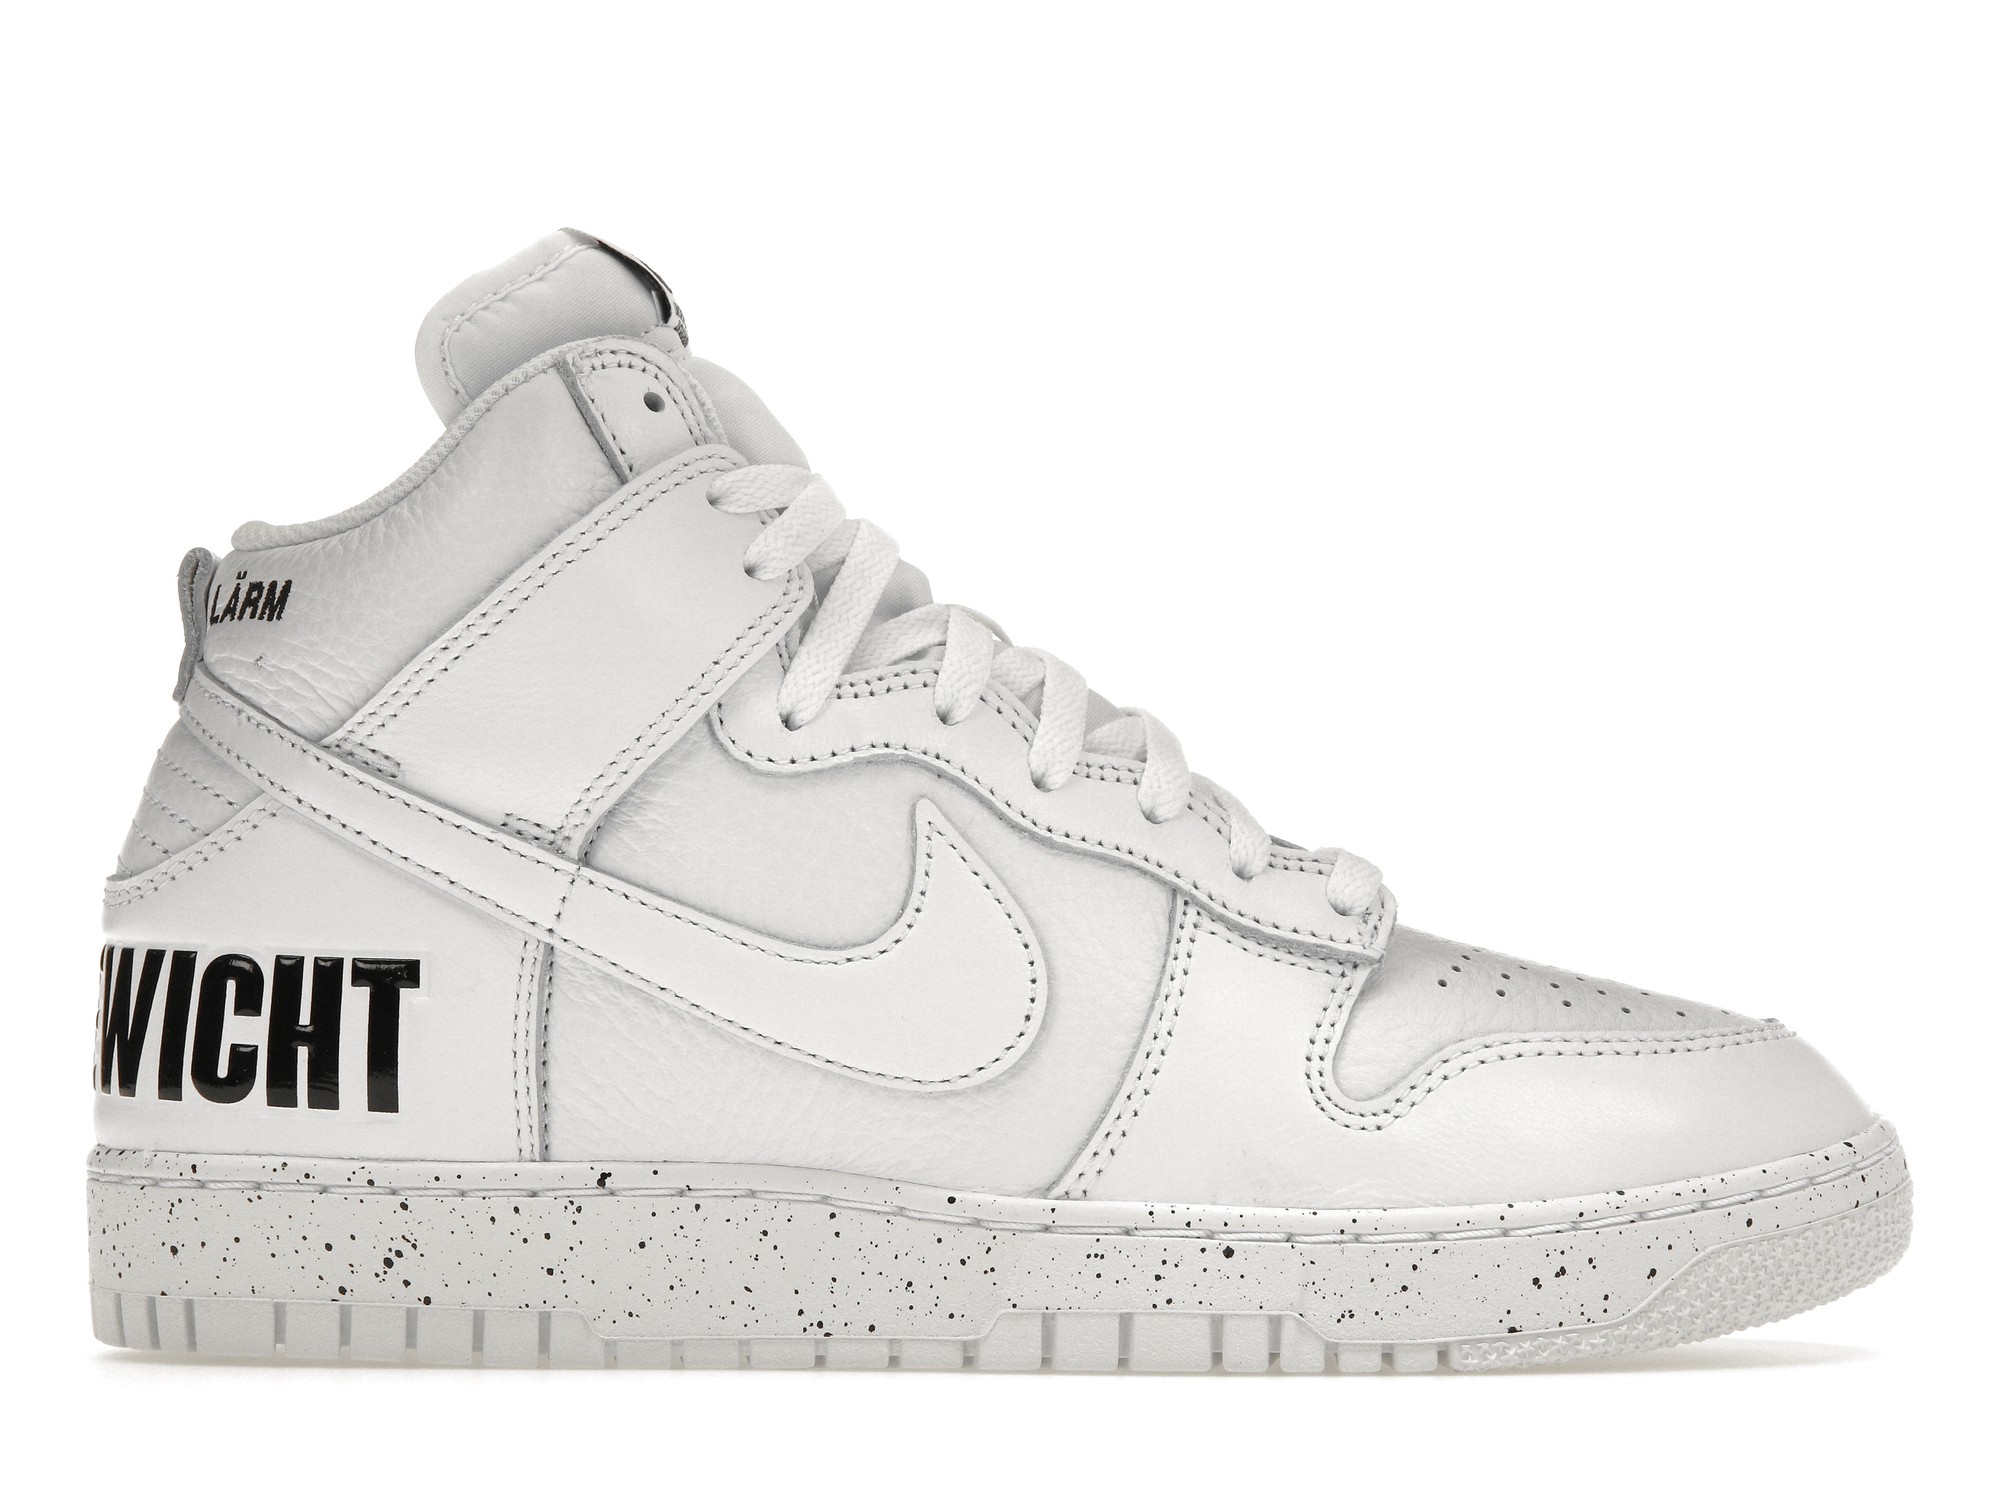 Nike Dunk High Undercover Chaos White Men's - DQ4121-100 - US